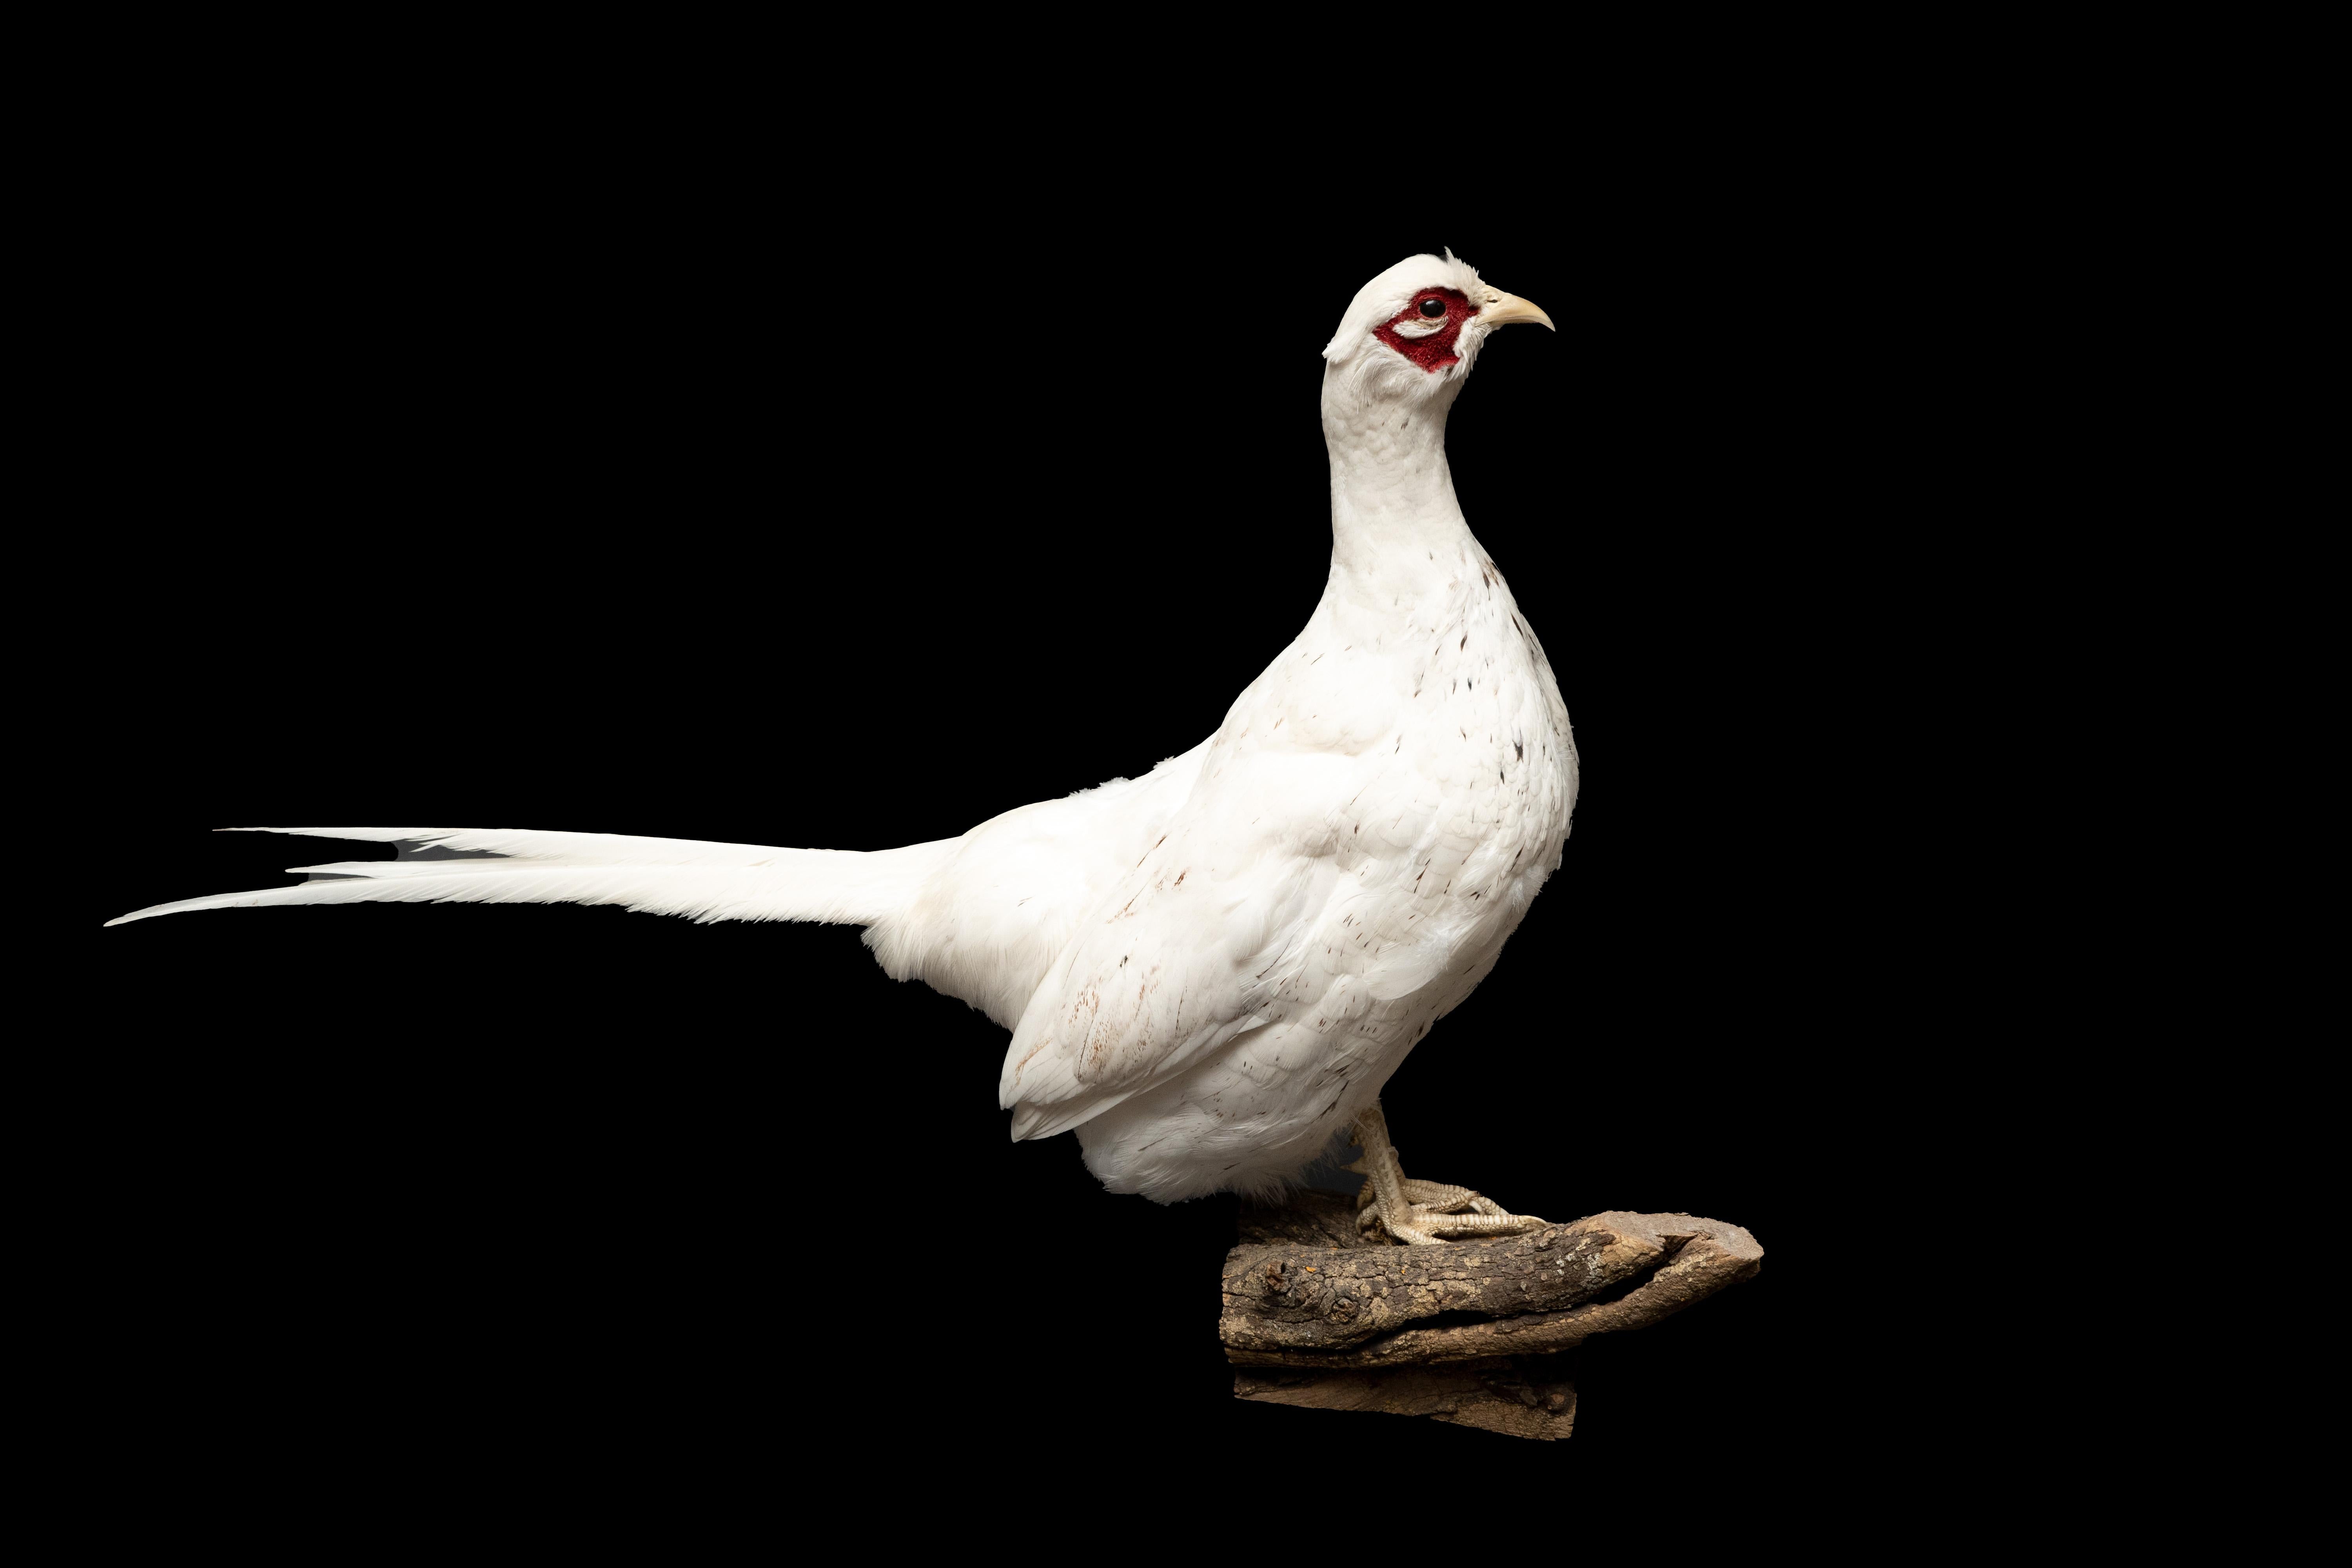 The Alaskan Snow Pheasant is a beautiful bird with unique features that make it a stunning addition to any collection. This bird is native to the Alaskan region and is well-known for its striking white plumage that blends in perfectly with the snowy